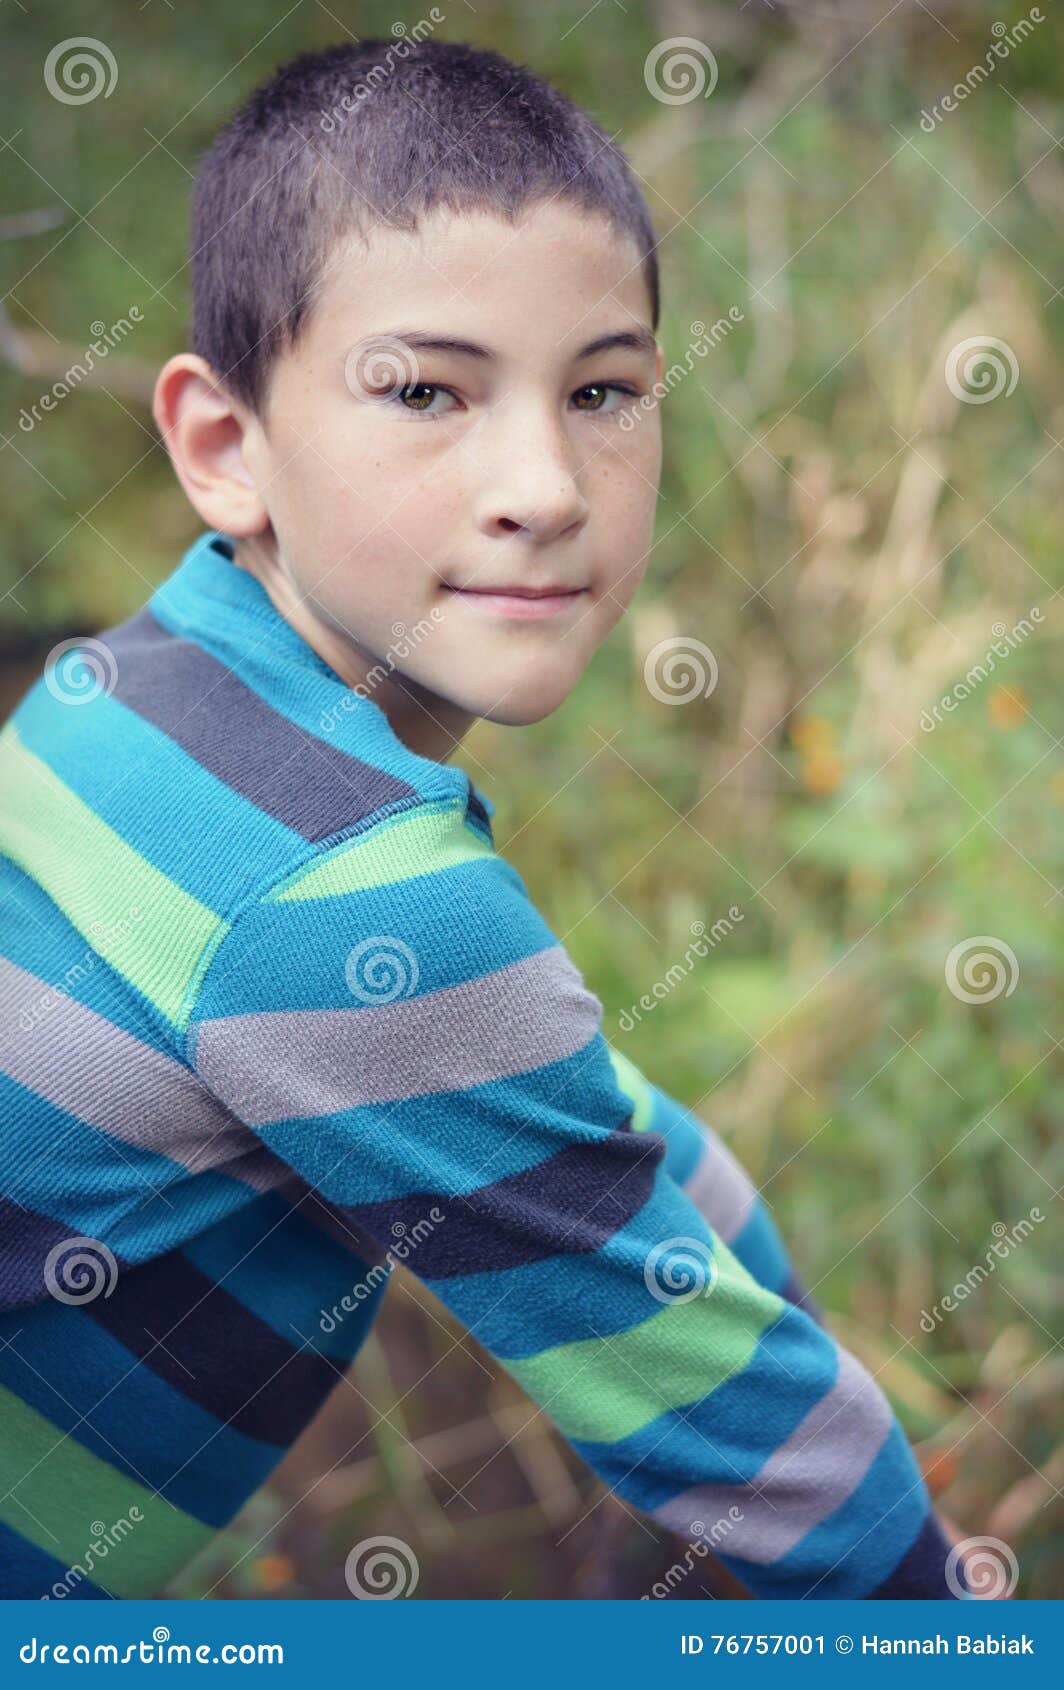 Boy in Outdoors stock image. Image of outdoors, adventure - 76757001